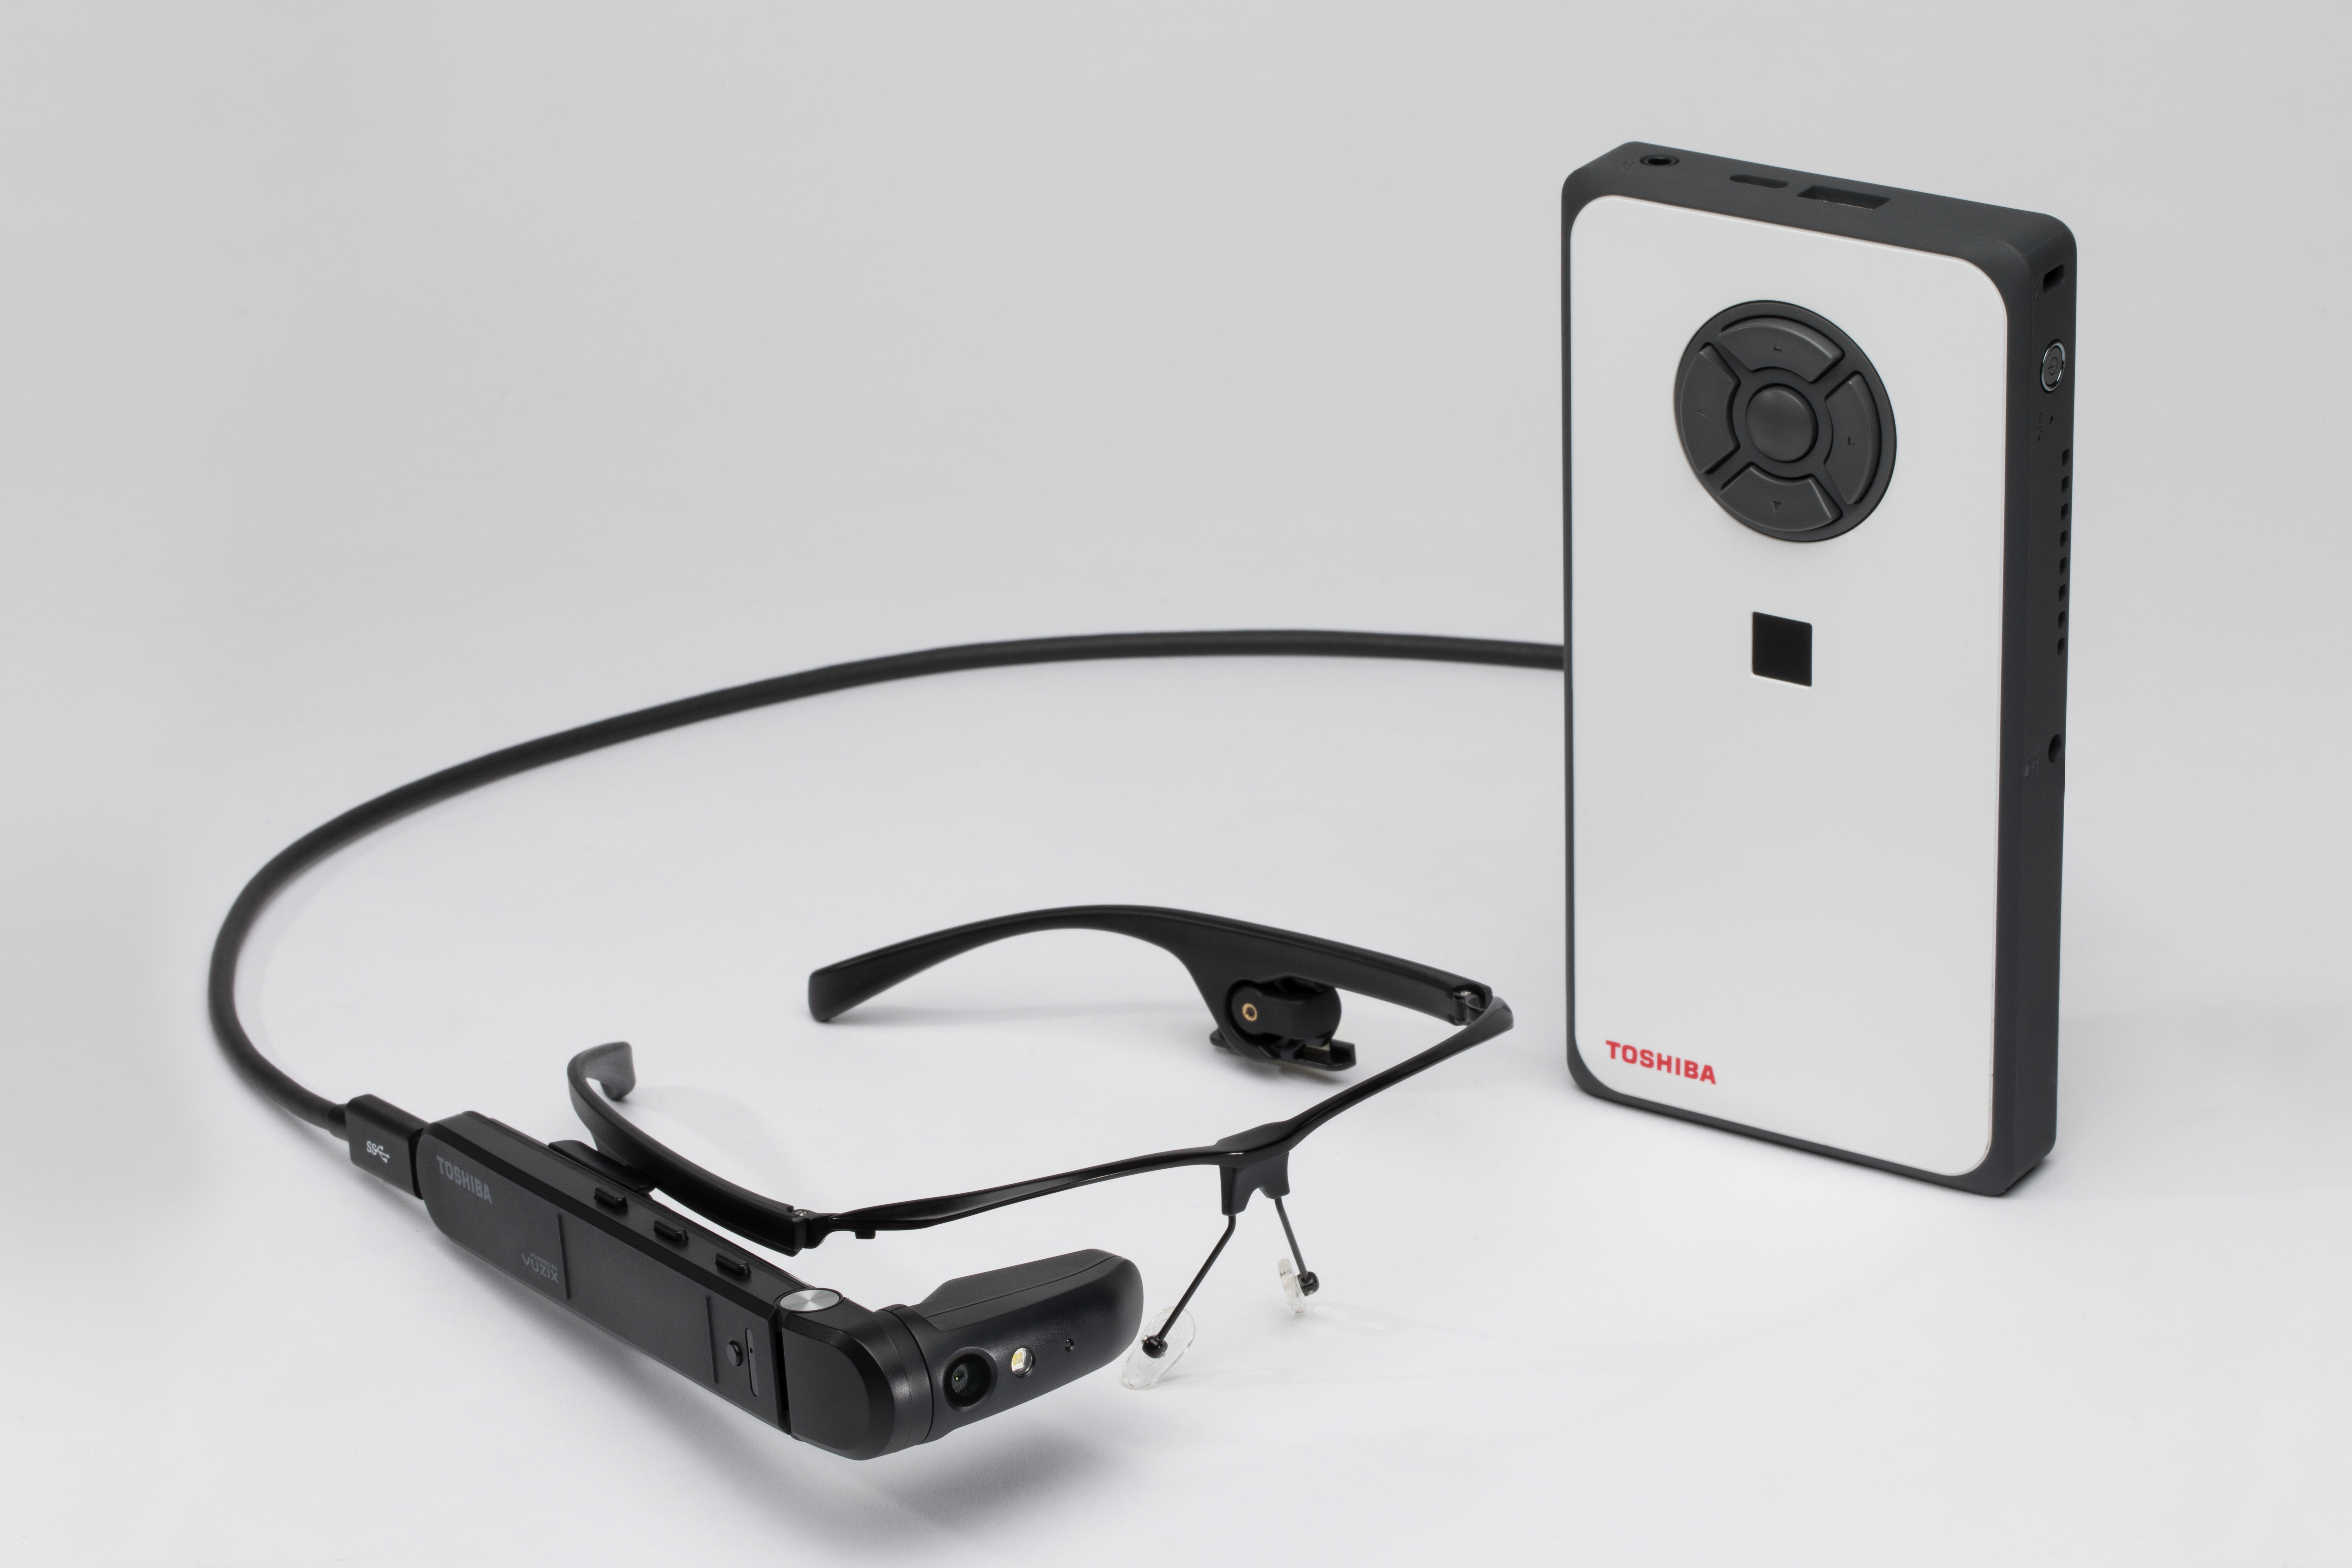 Vuzix Starts Mass Production of the First Windows-based Augmented Reality Glasses for Toshiba